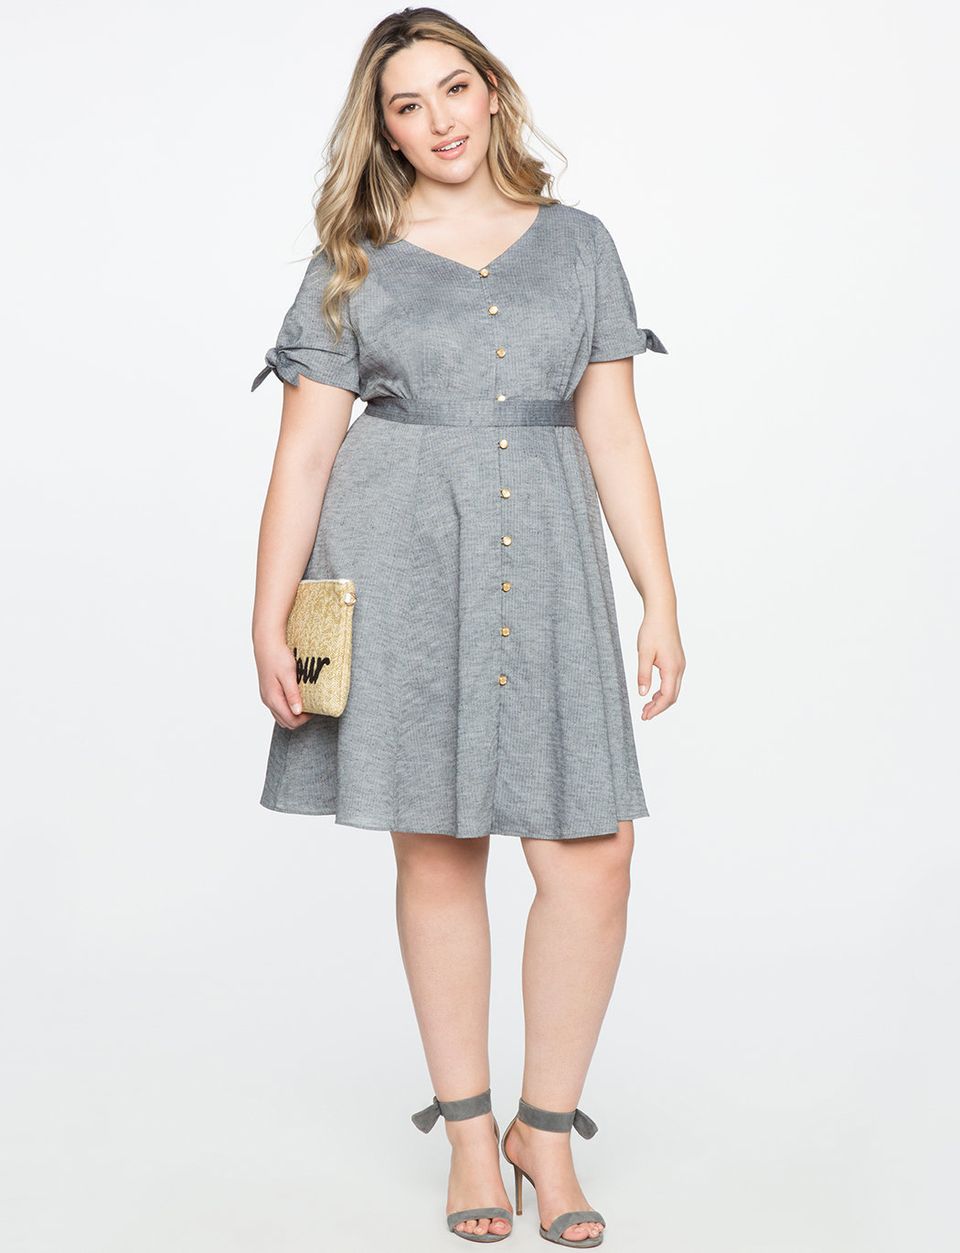 28 Button Down Dresses And Skirts For Curvy Ladies That Won't Gape